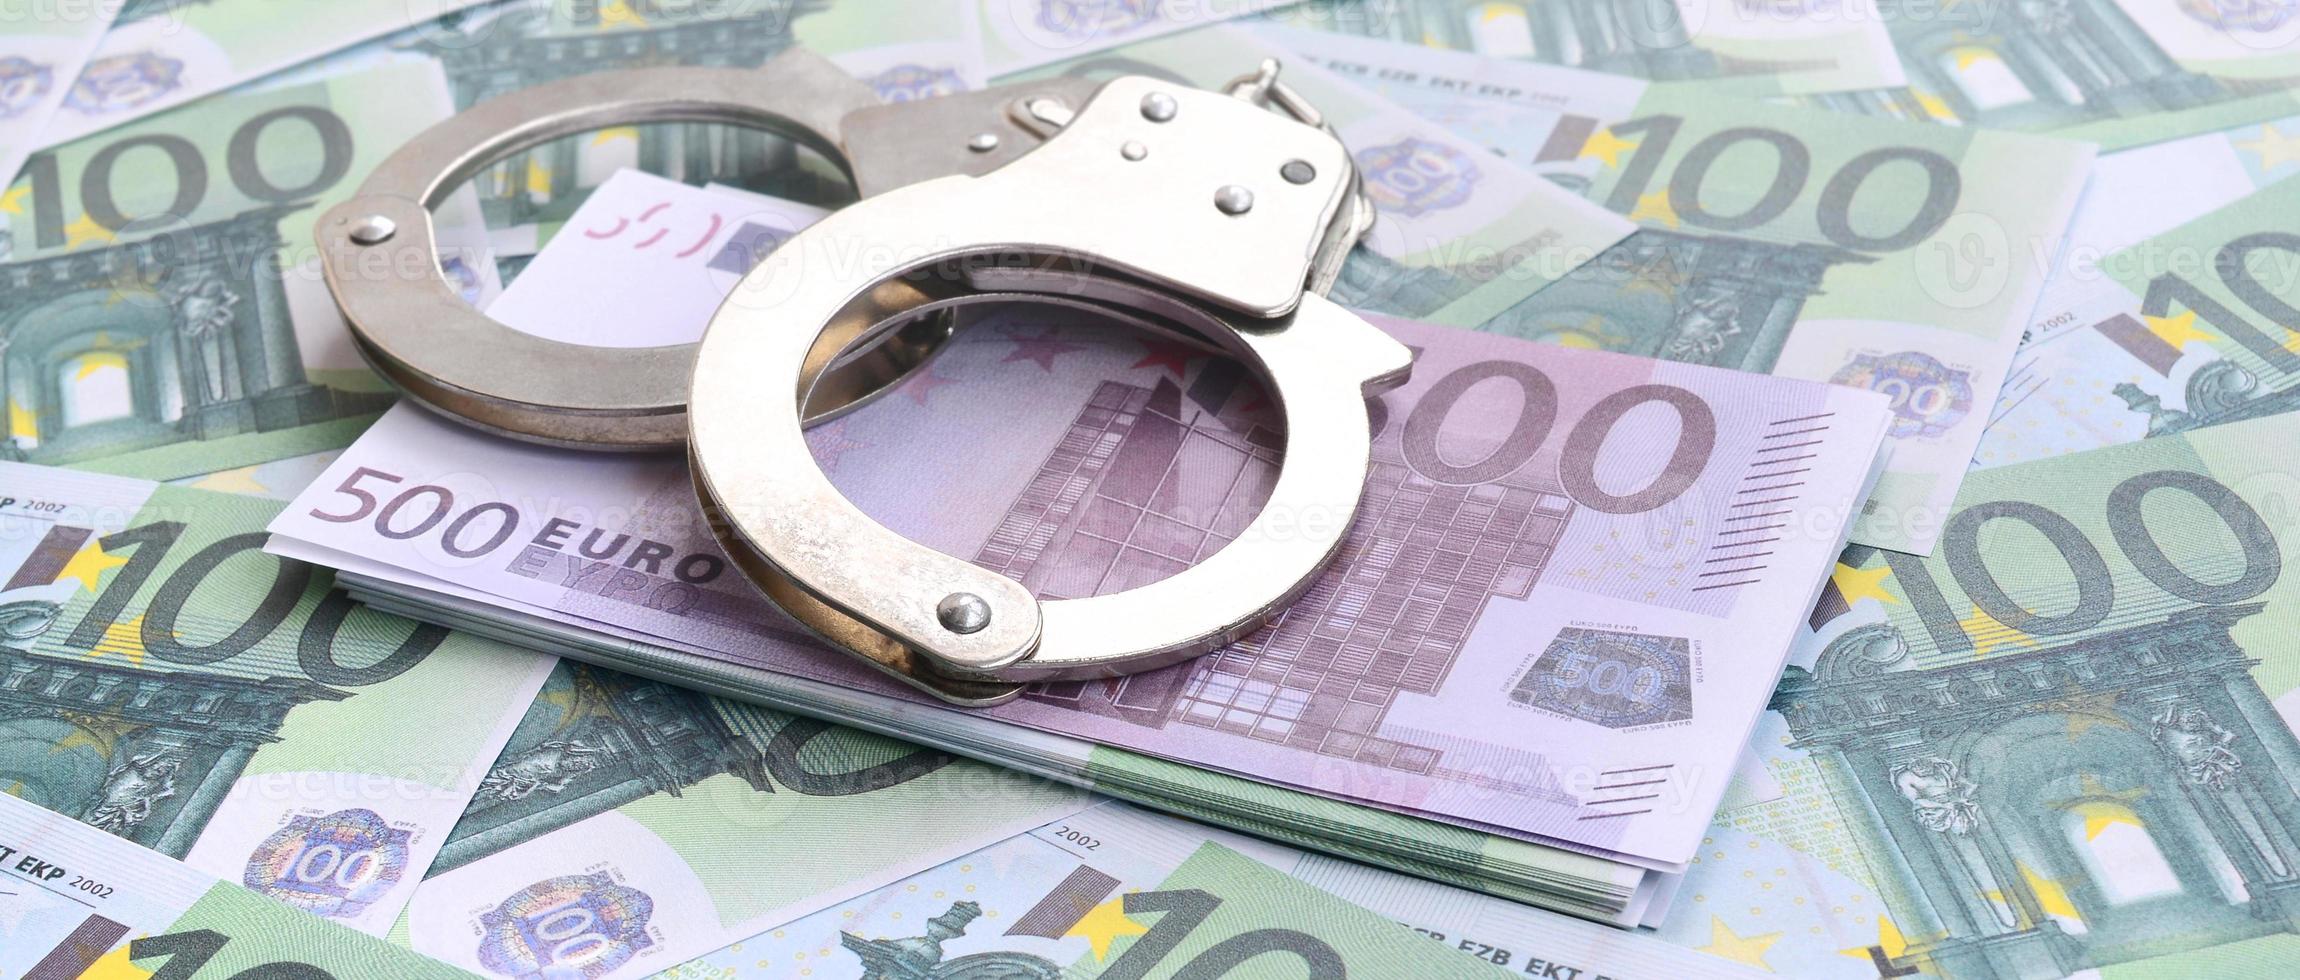 Police handcuffs lies on a set of green monetary denominations of 100 euros. A lot of money forms an infinite heap photo